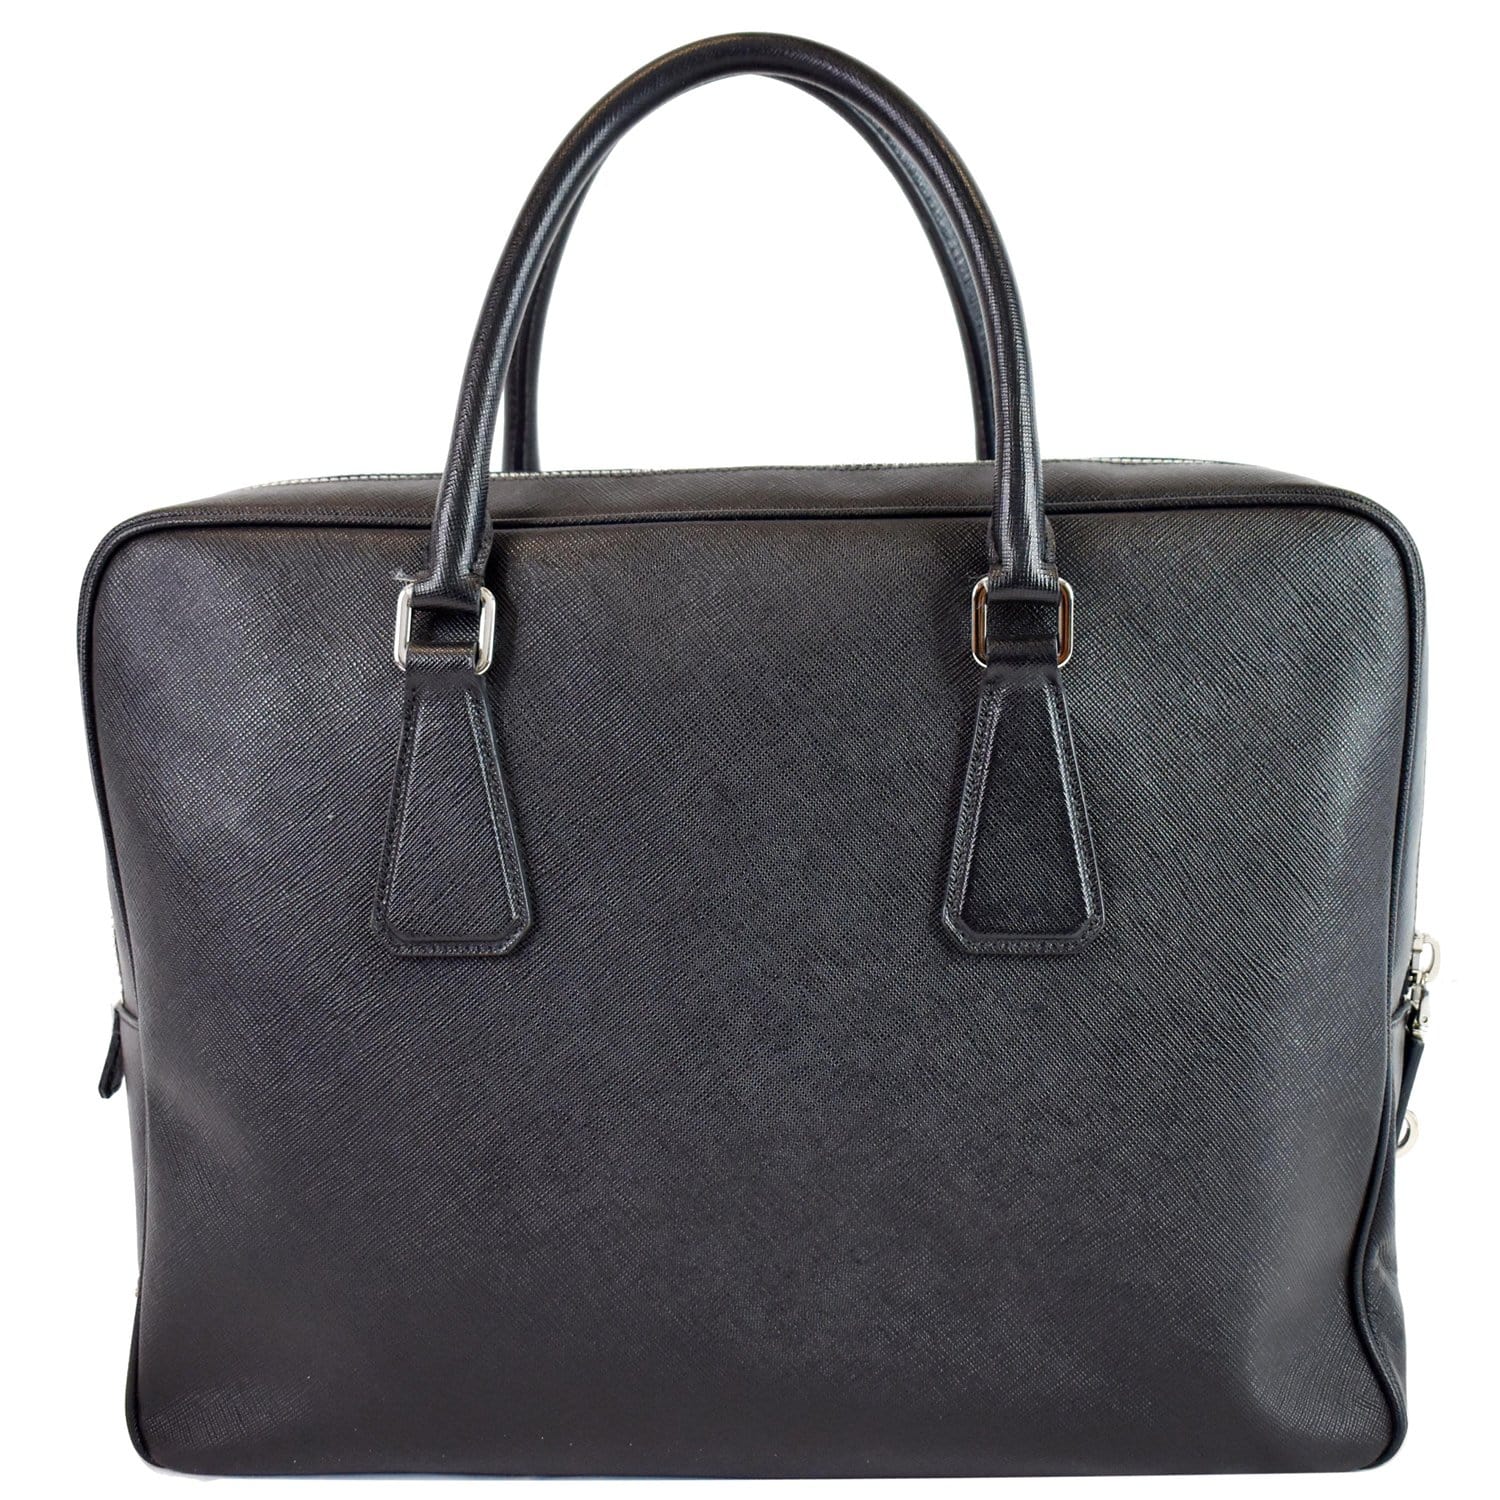 New With Tags Calvin Klein Saffiano Leather Black Satchel Bag.100%Authentic.